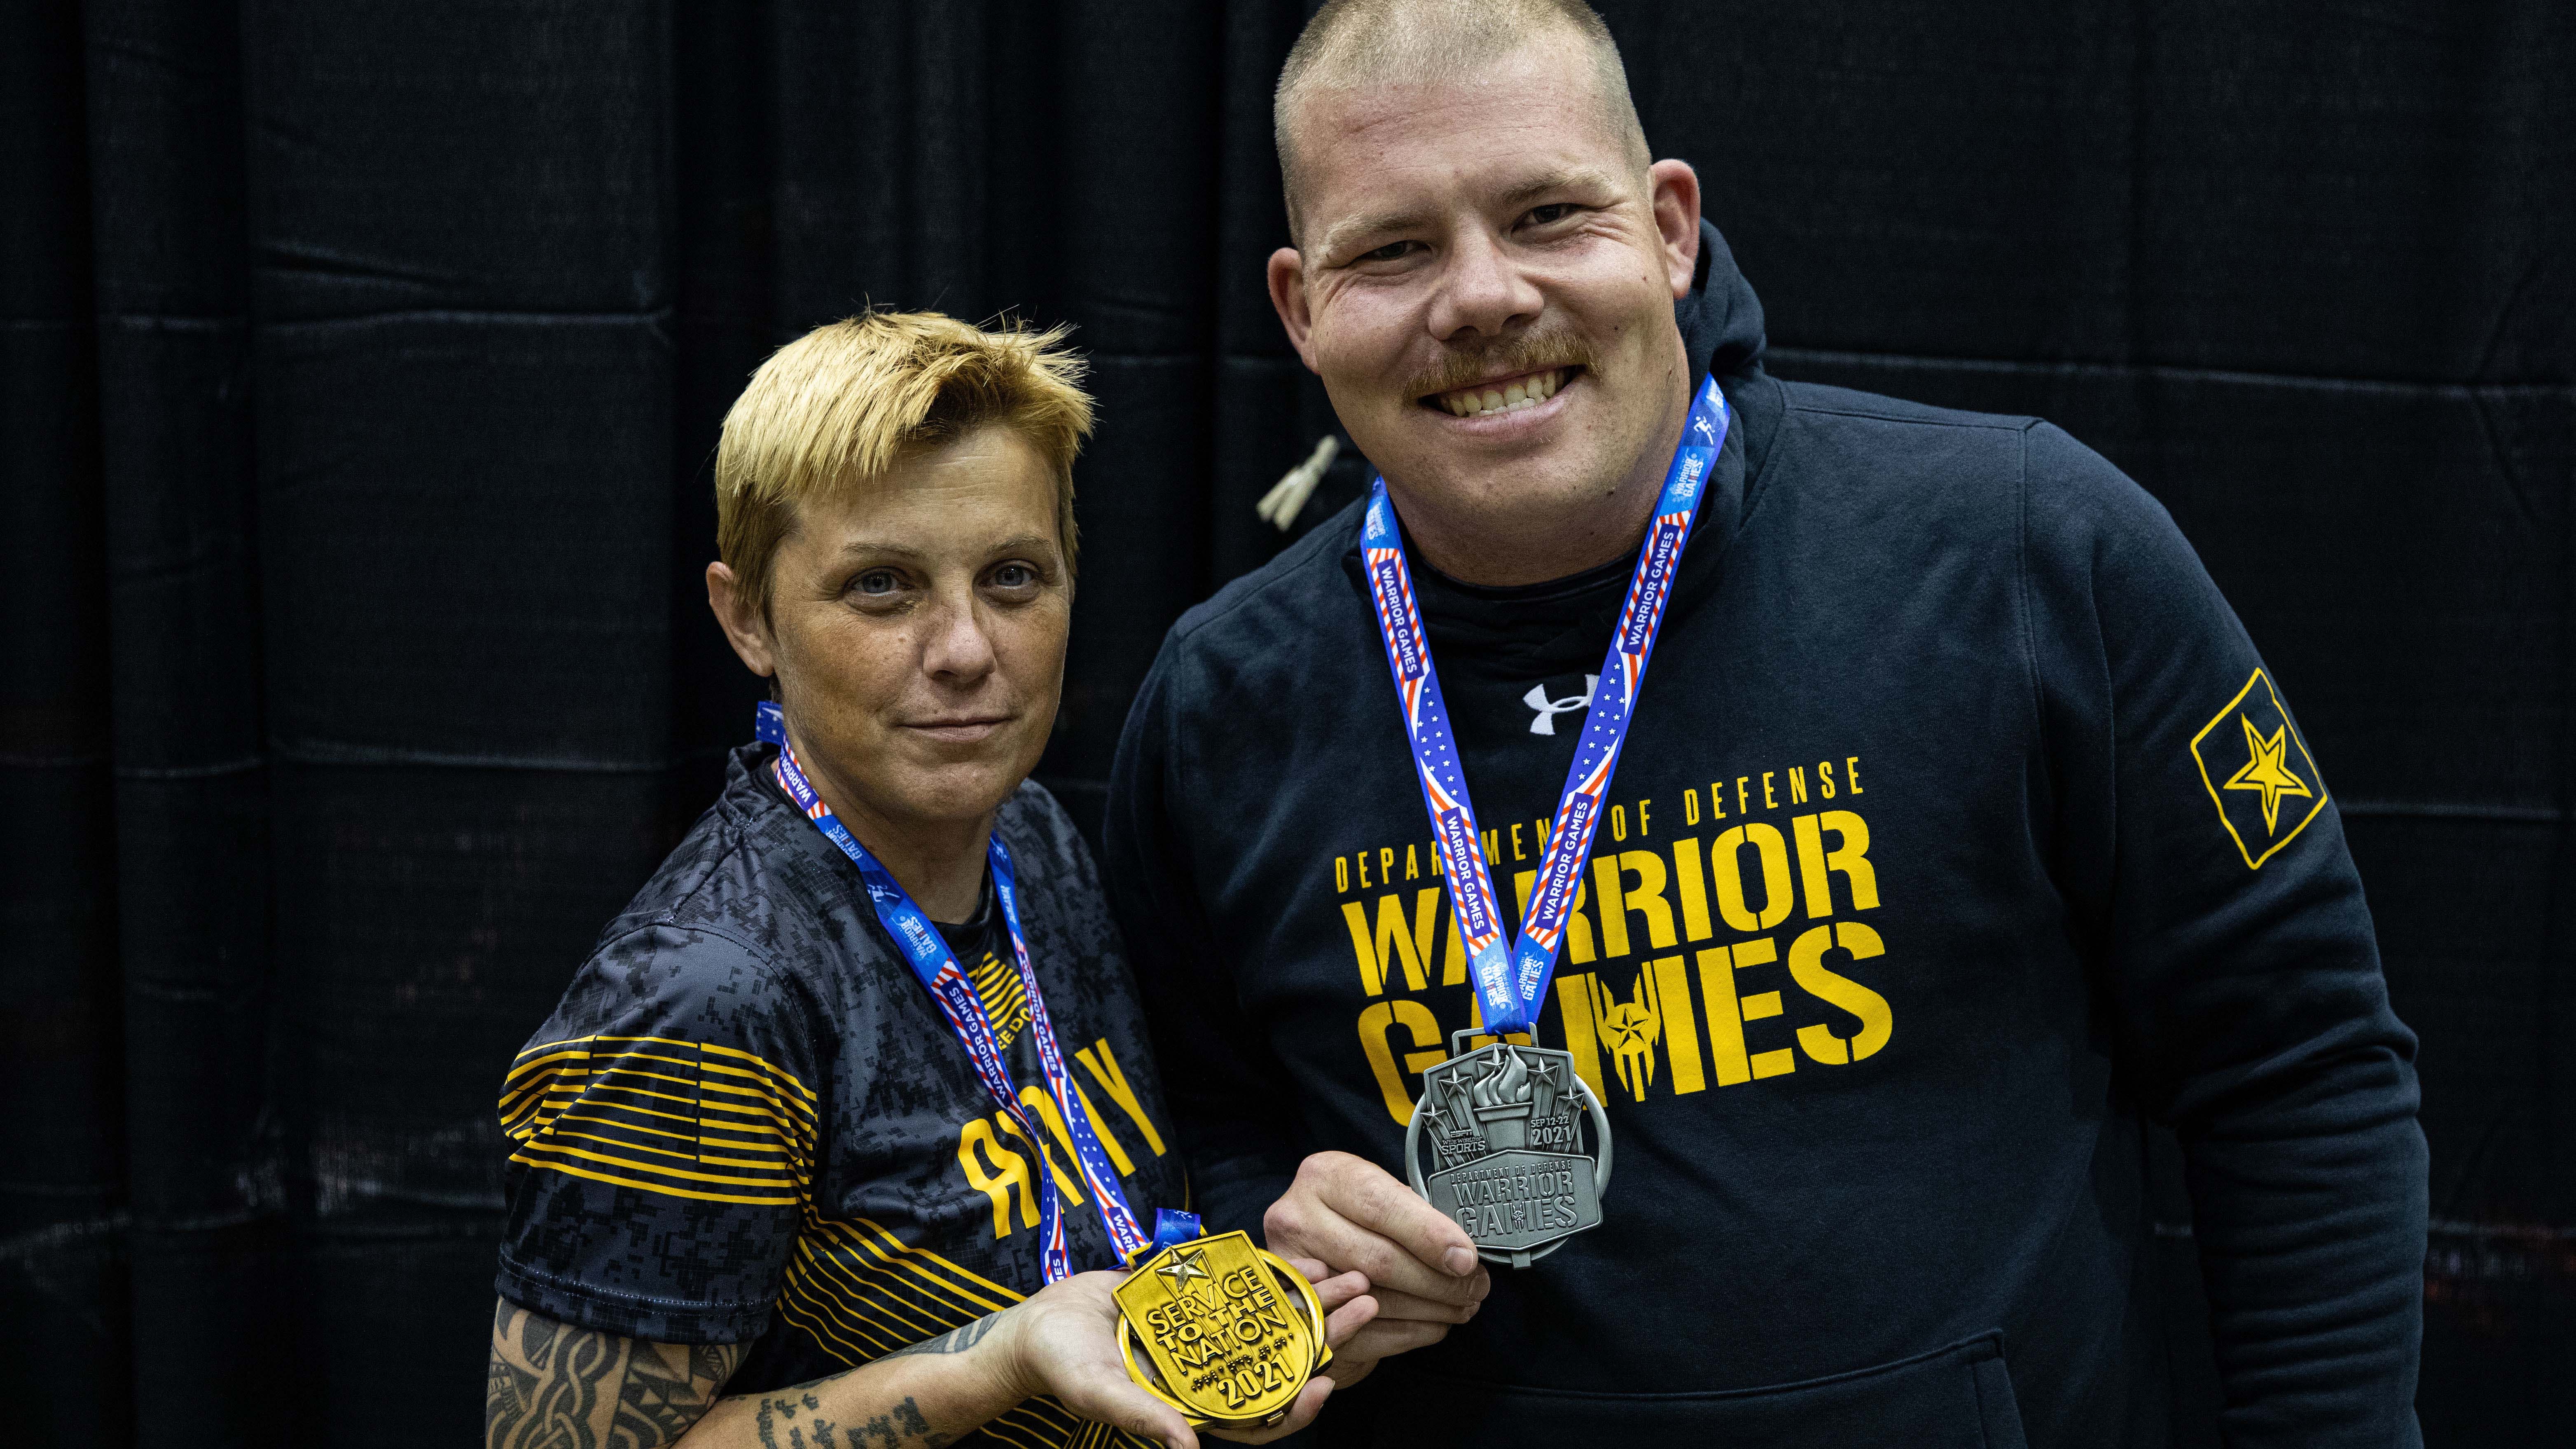 Soldiers celebrate their Warrior Games medals